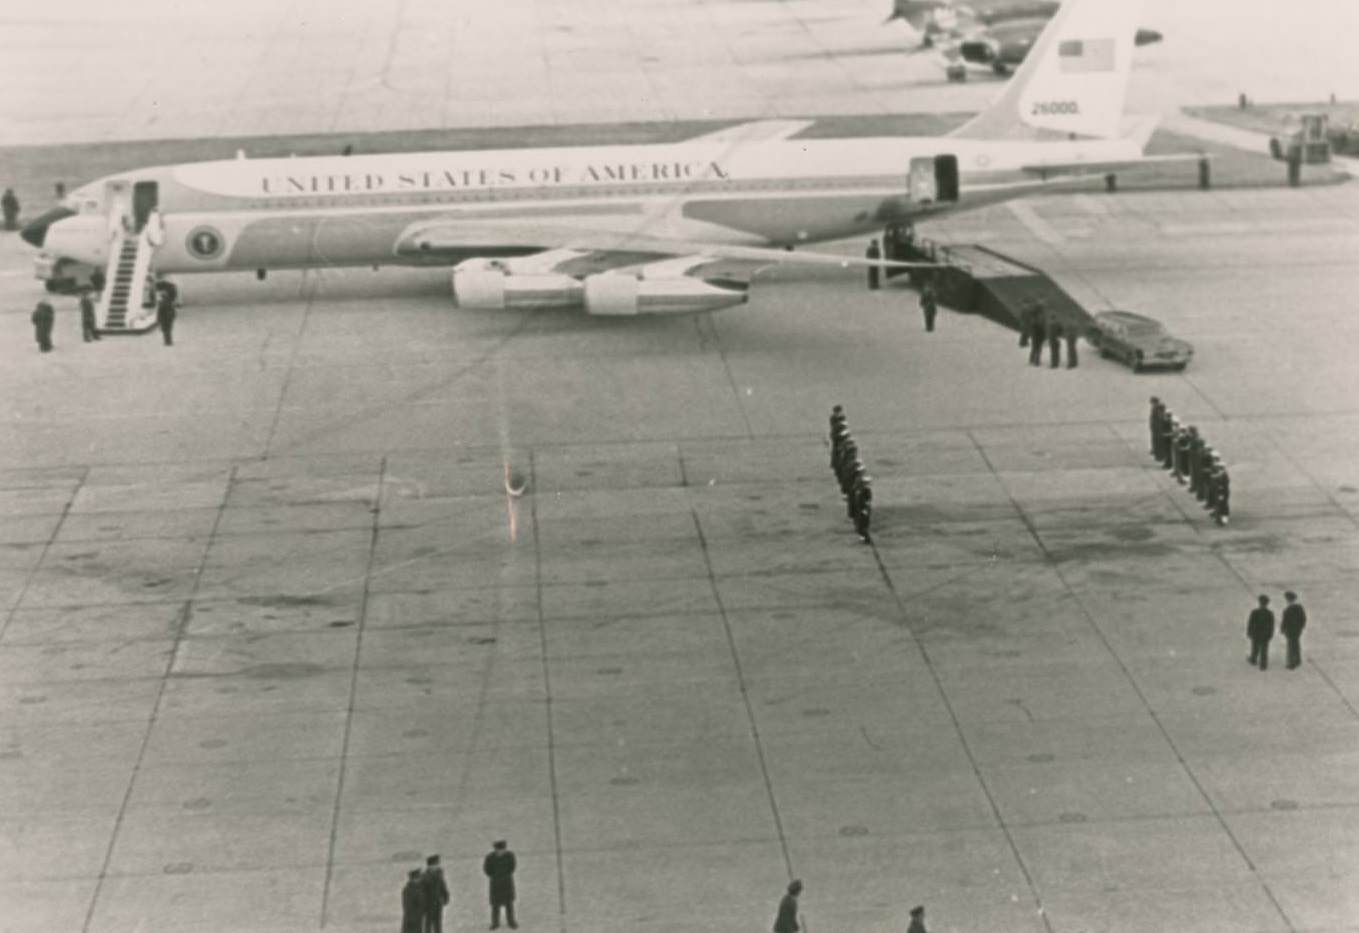 Air Force One carrying the casket of President Lyndon B. Johnson. People stand on the tarmac, some at attention, 1973